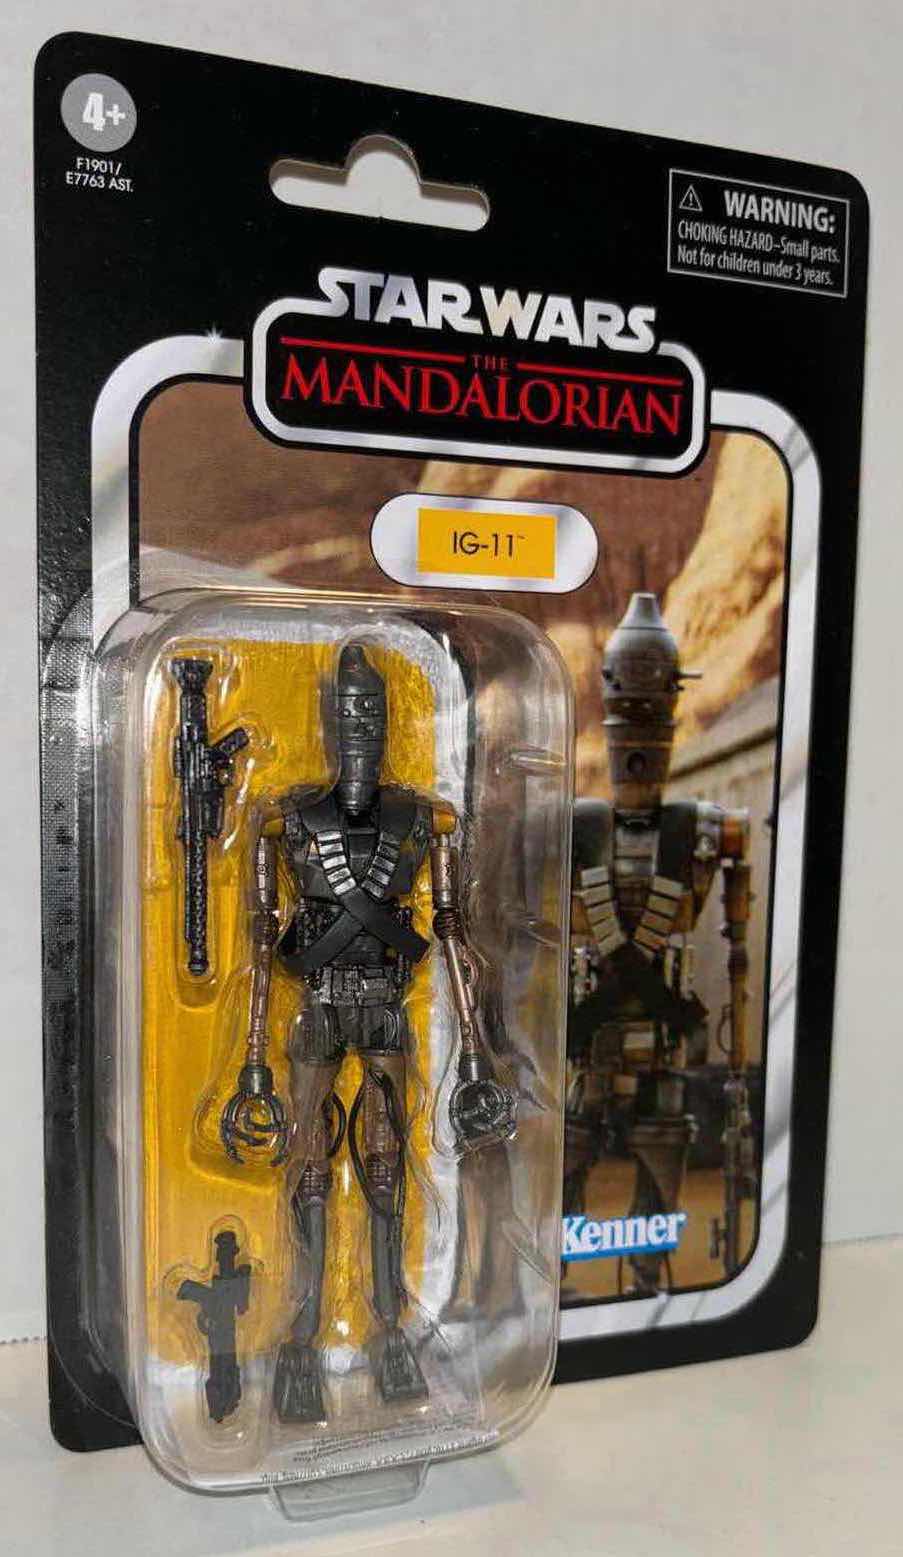 Photo 1 of NEW STAR WARS THE MANDALORIAN 3.75” THE VINTAGE COLLECTION ACTION FIGURE & ACCESSORIES, “IG-11” (1)